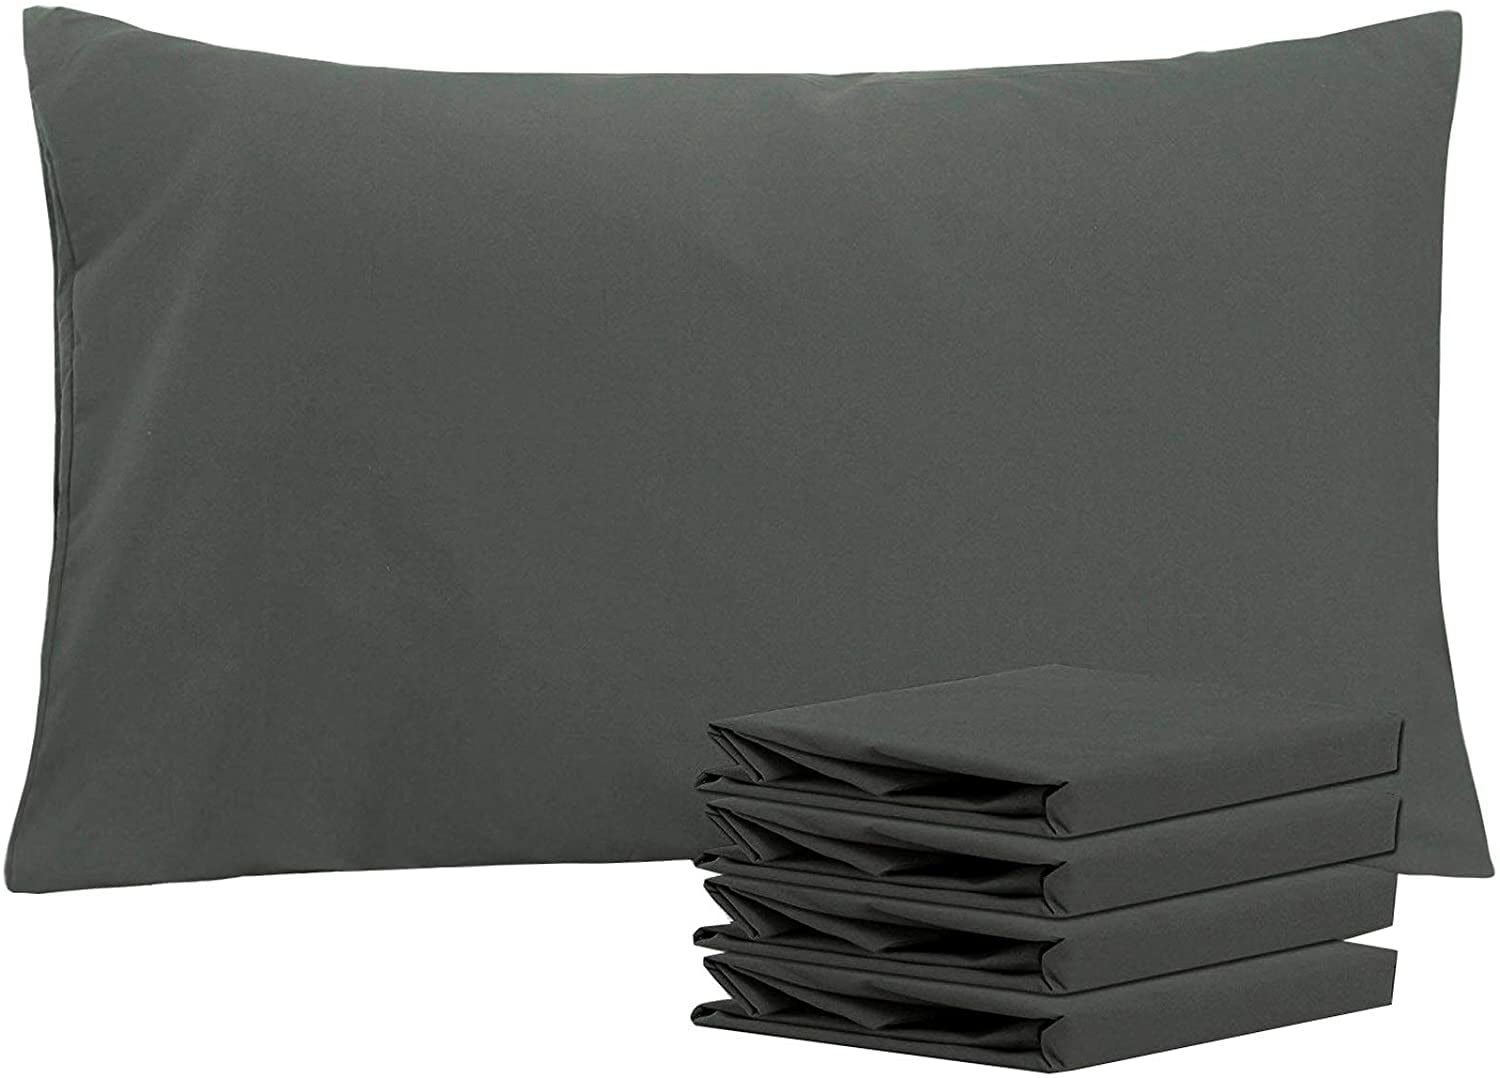 Soft and Cozy Fade Details about   NTBAY 100% Brushed Microfiber Pillowcases Set of 4 Wrinkle 